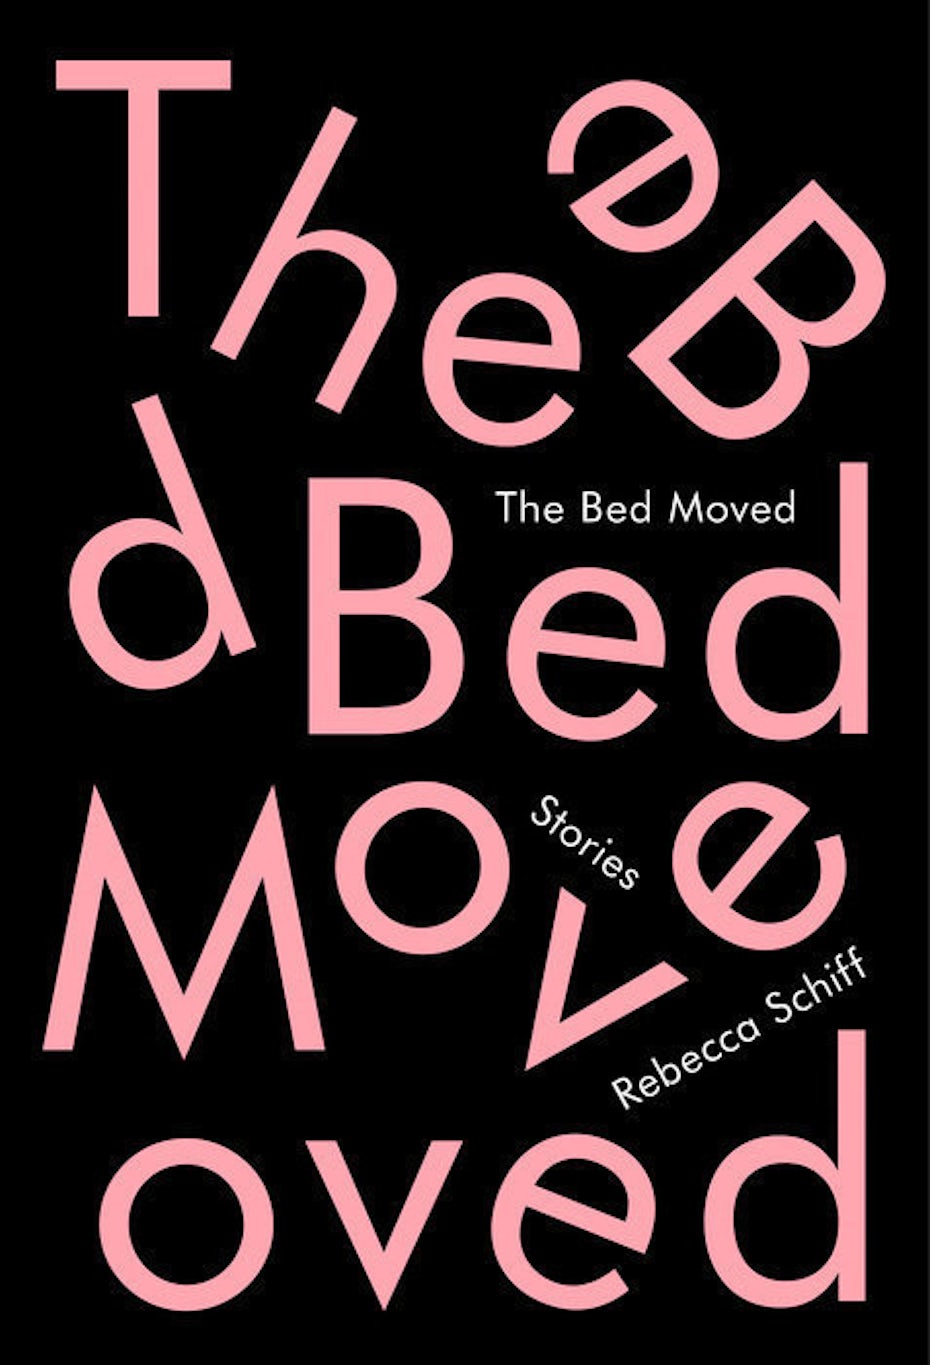 example for breaking design rules: The Bed Moved by Rebecca Schiff, Designed by Janet Hansen